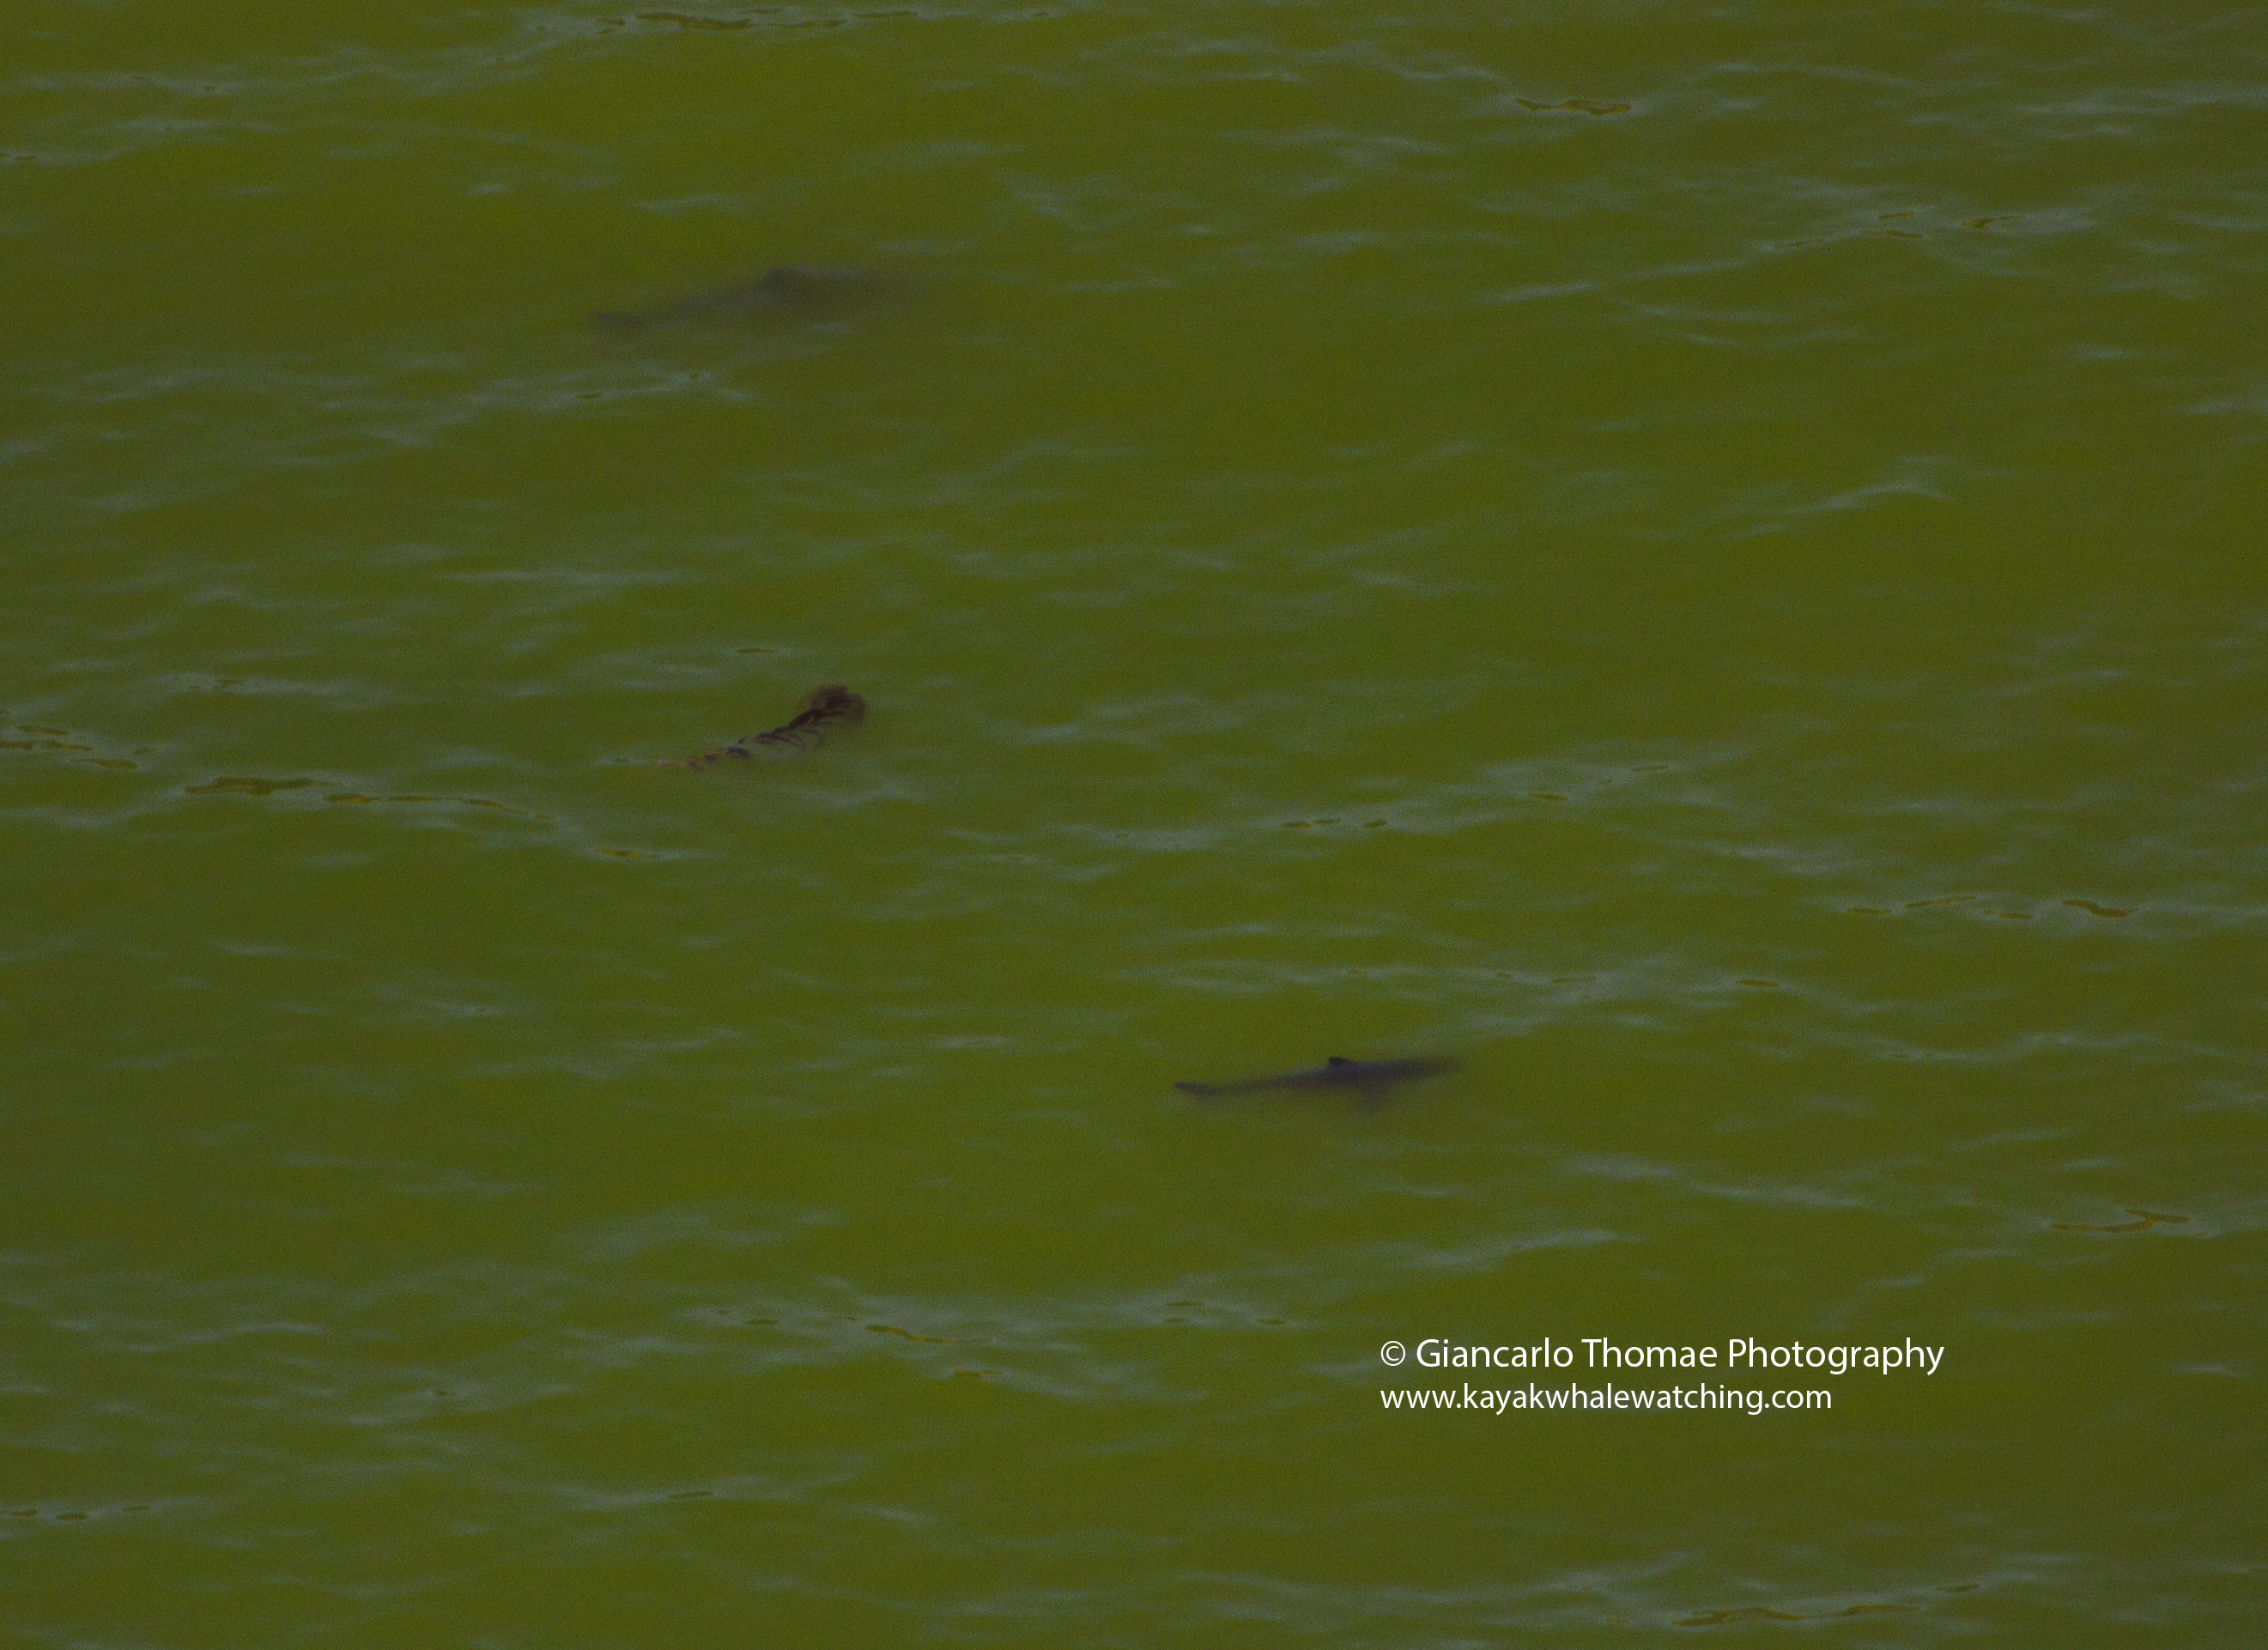 Images of an estimated 15 great white sharks were captured near Aptos on June 25th. (Photo: Giancarlo Thomae Photography)